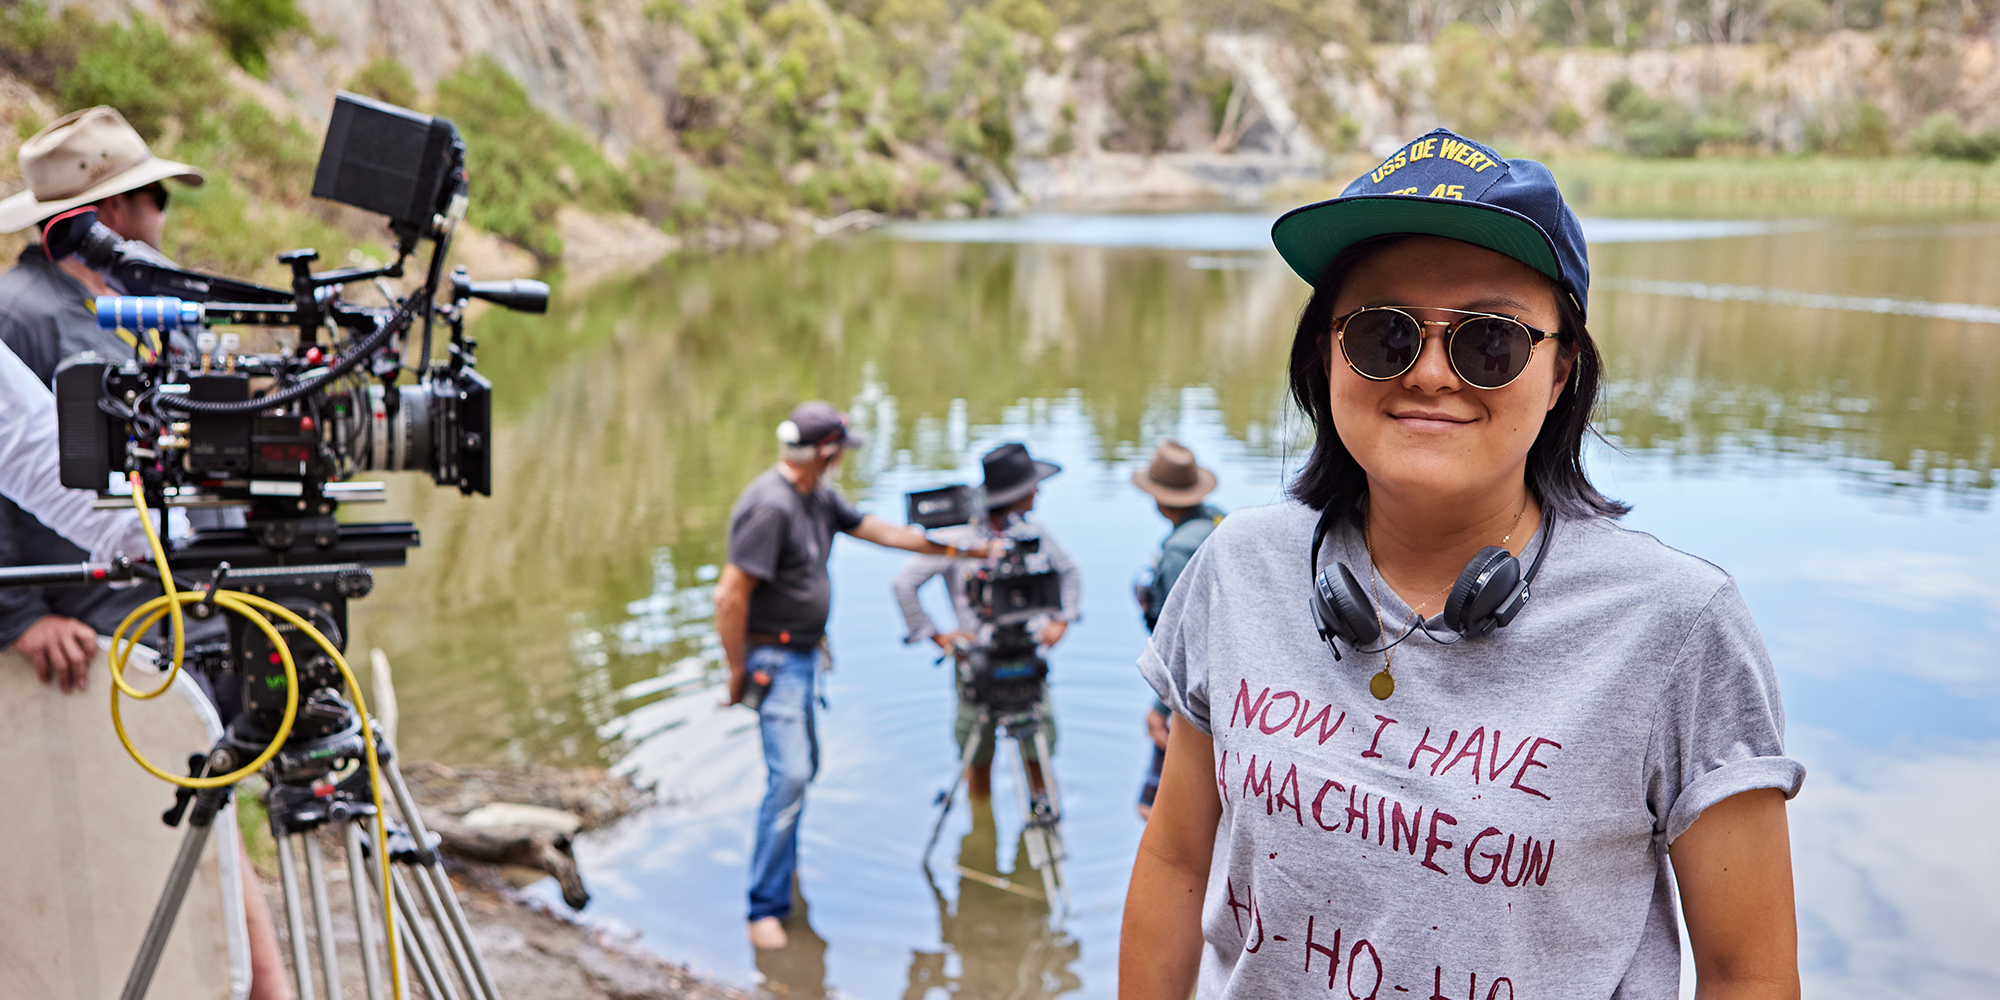 Corrie Chen on set of New Gold Mountain